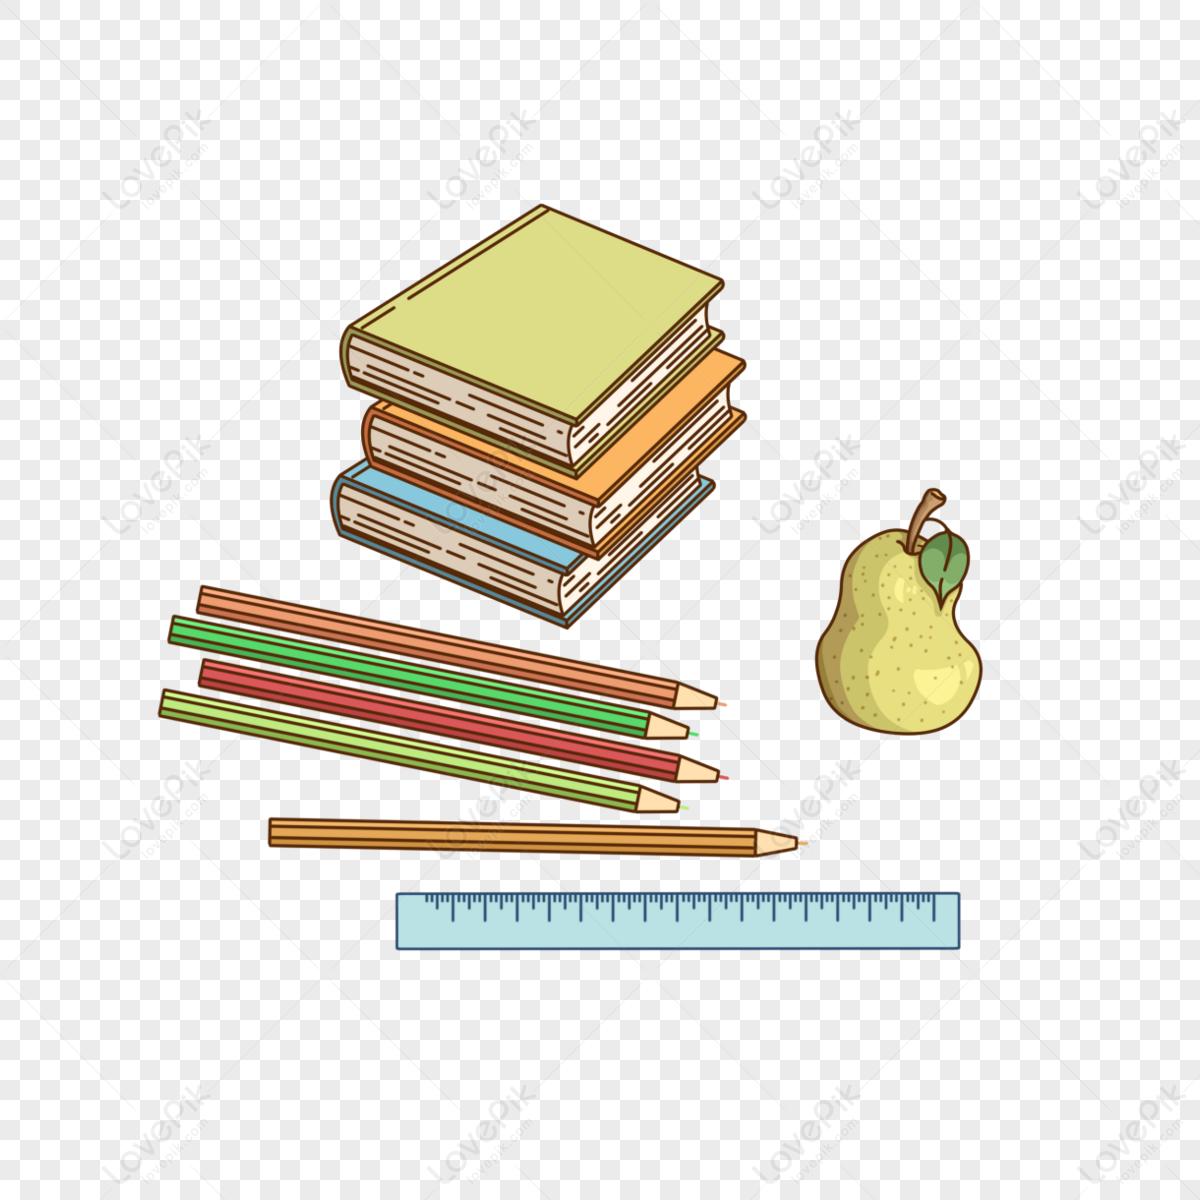 Cartoon hand-painted school books stationery design,student,classroom png free download